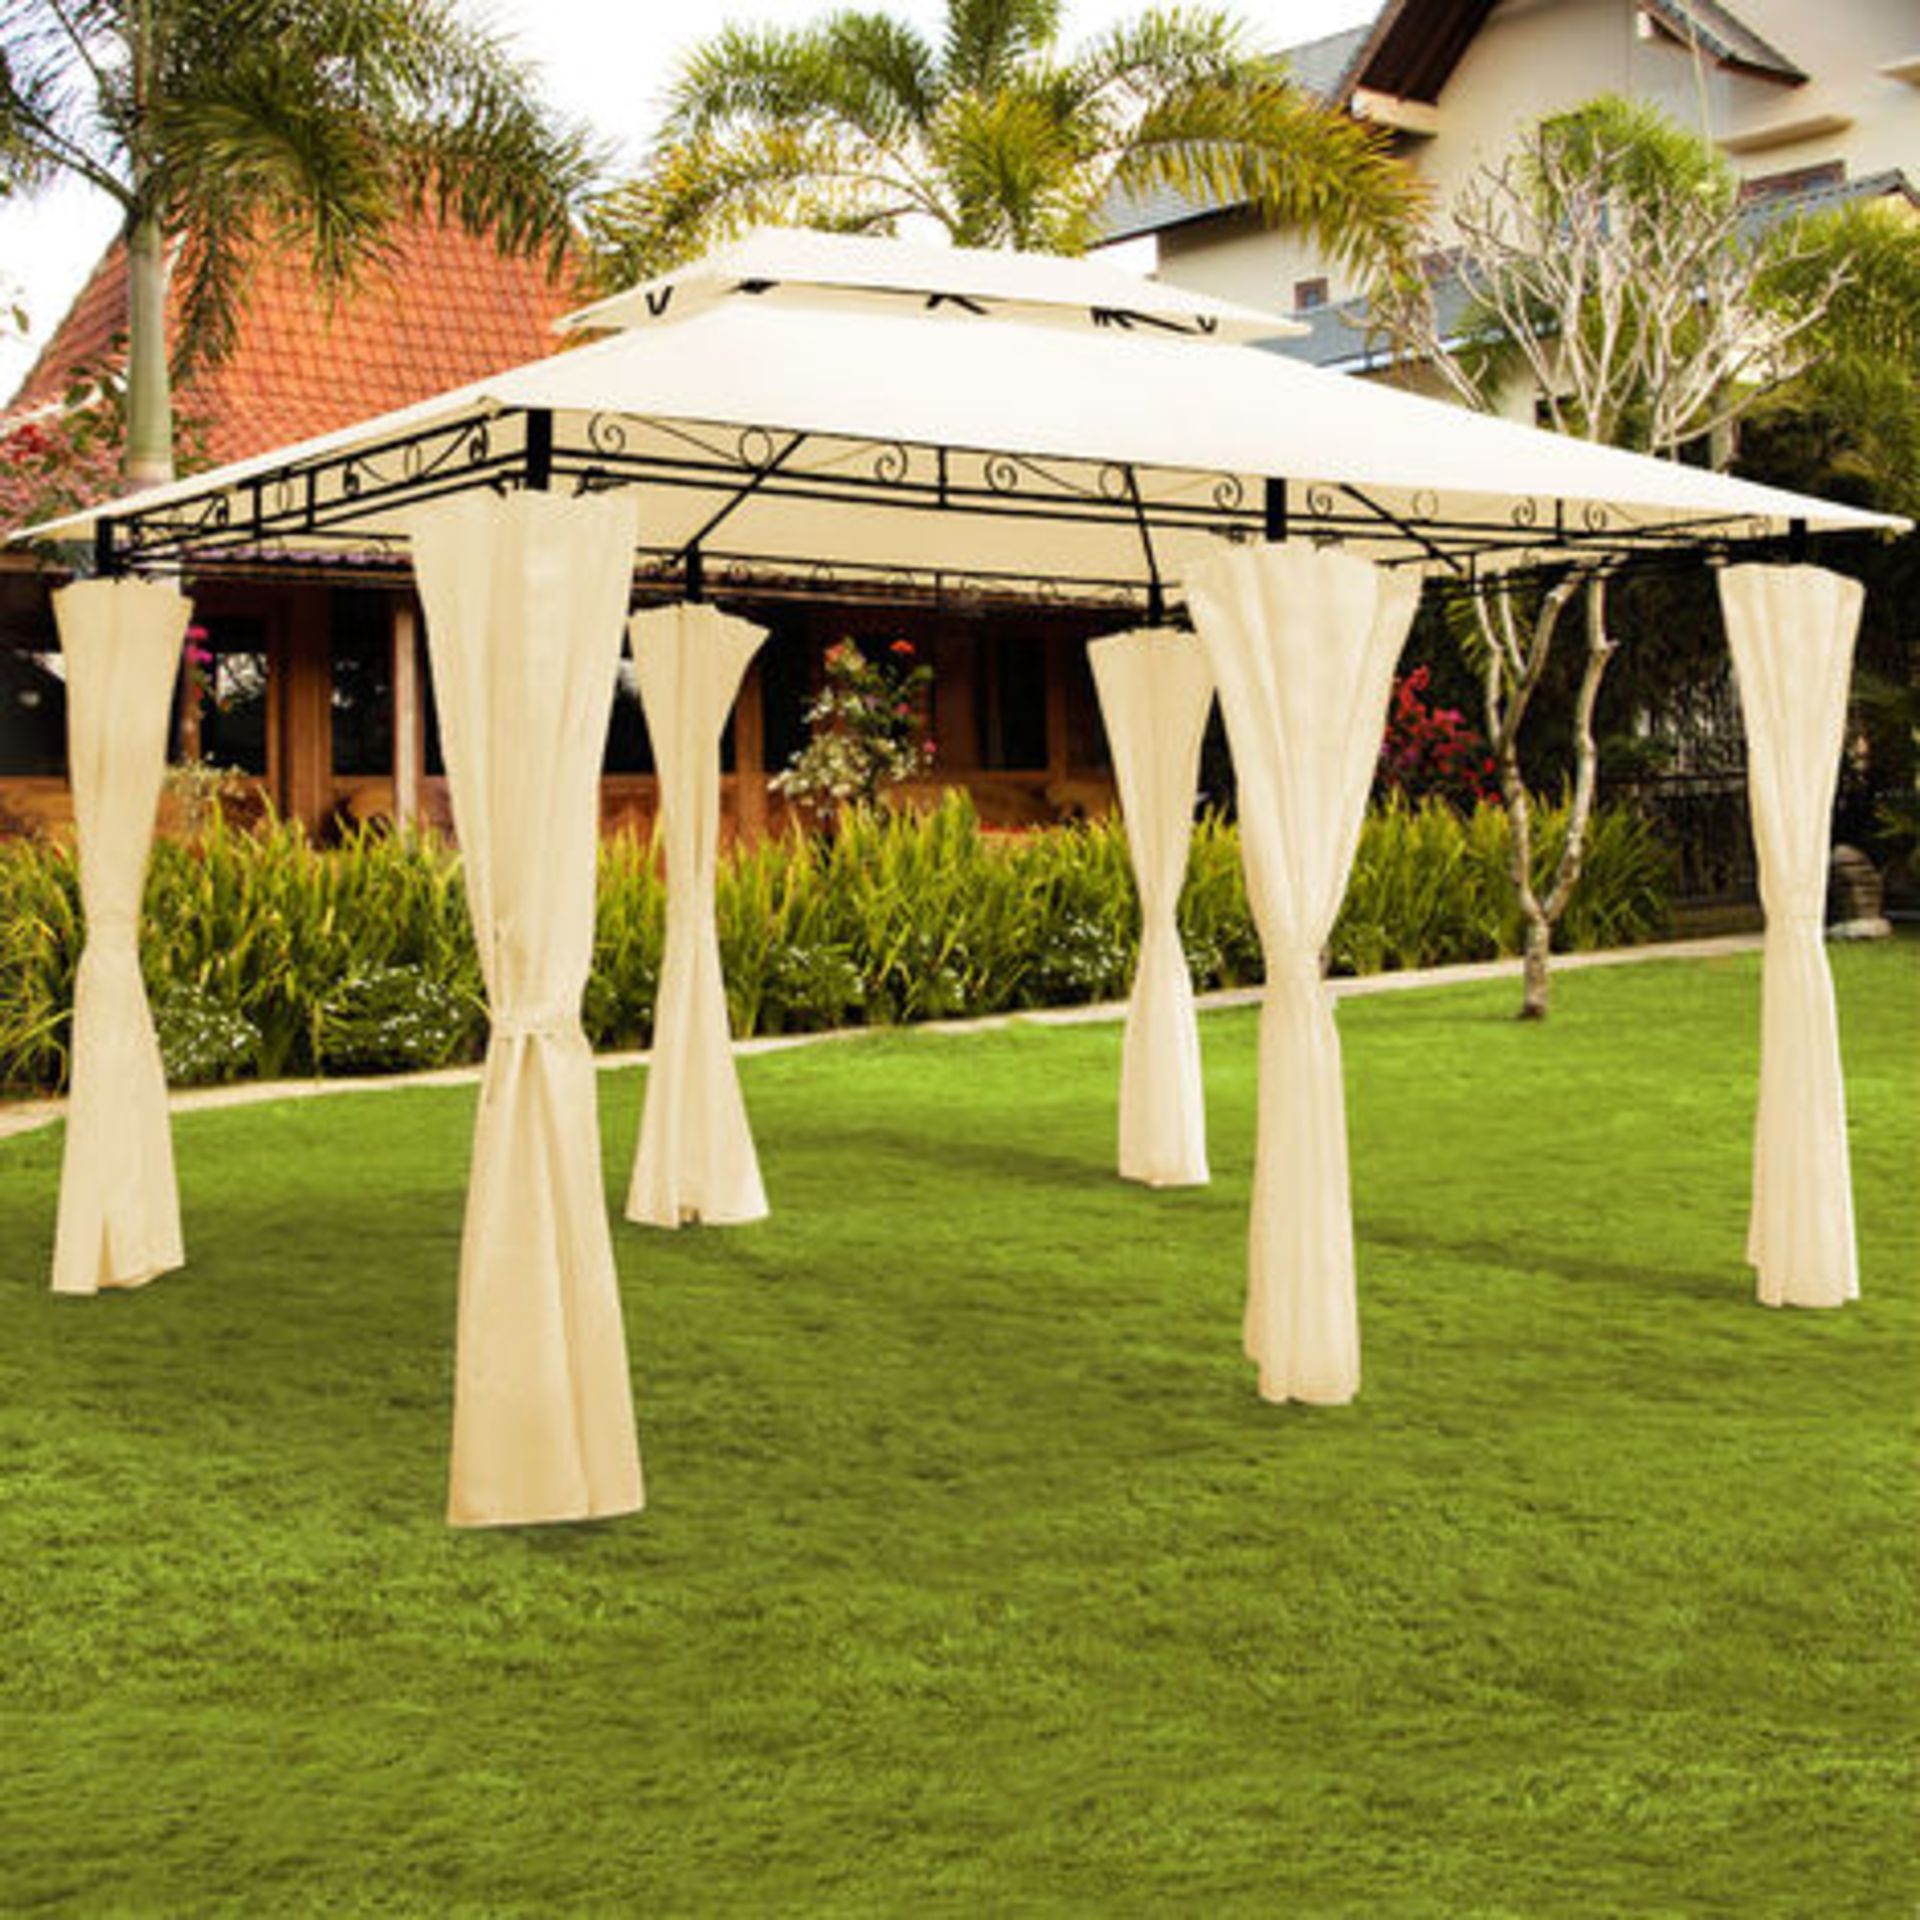 V Brand New 3m x 4m Cream Powder Coated Garden Canopy/Gazebo With Curtains And Integrated Air